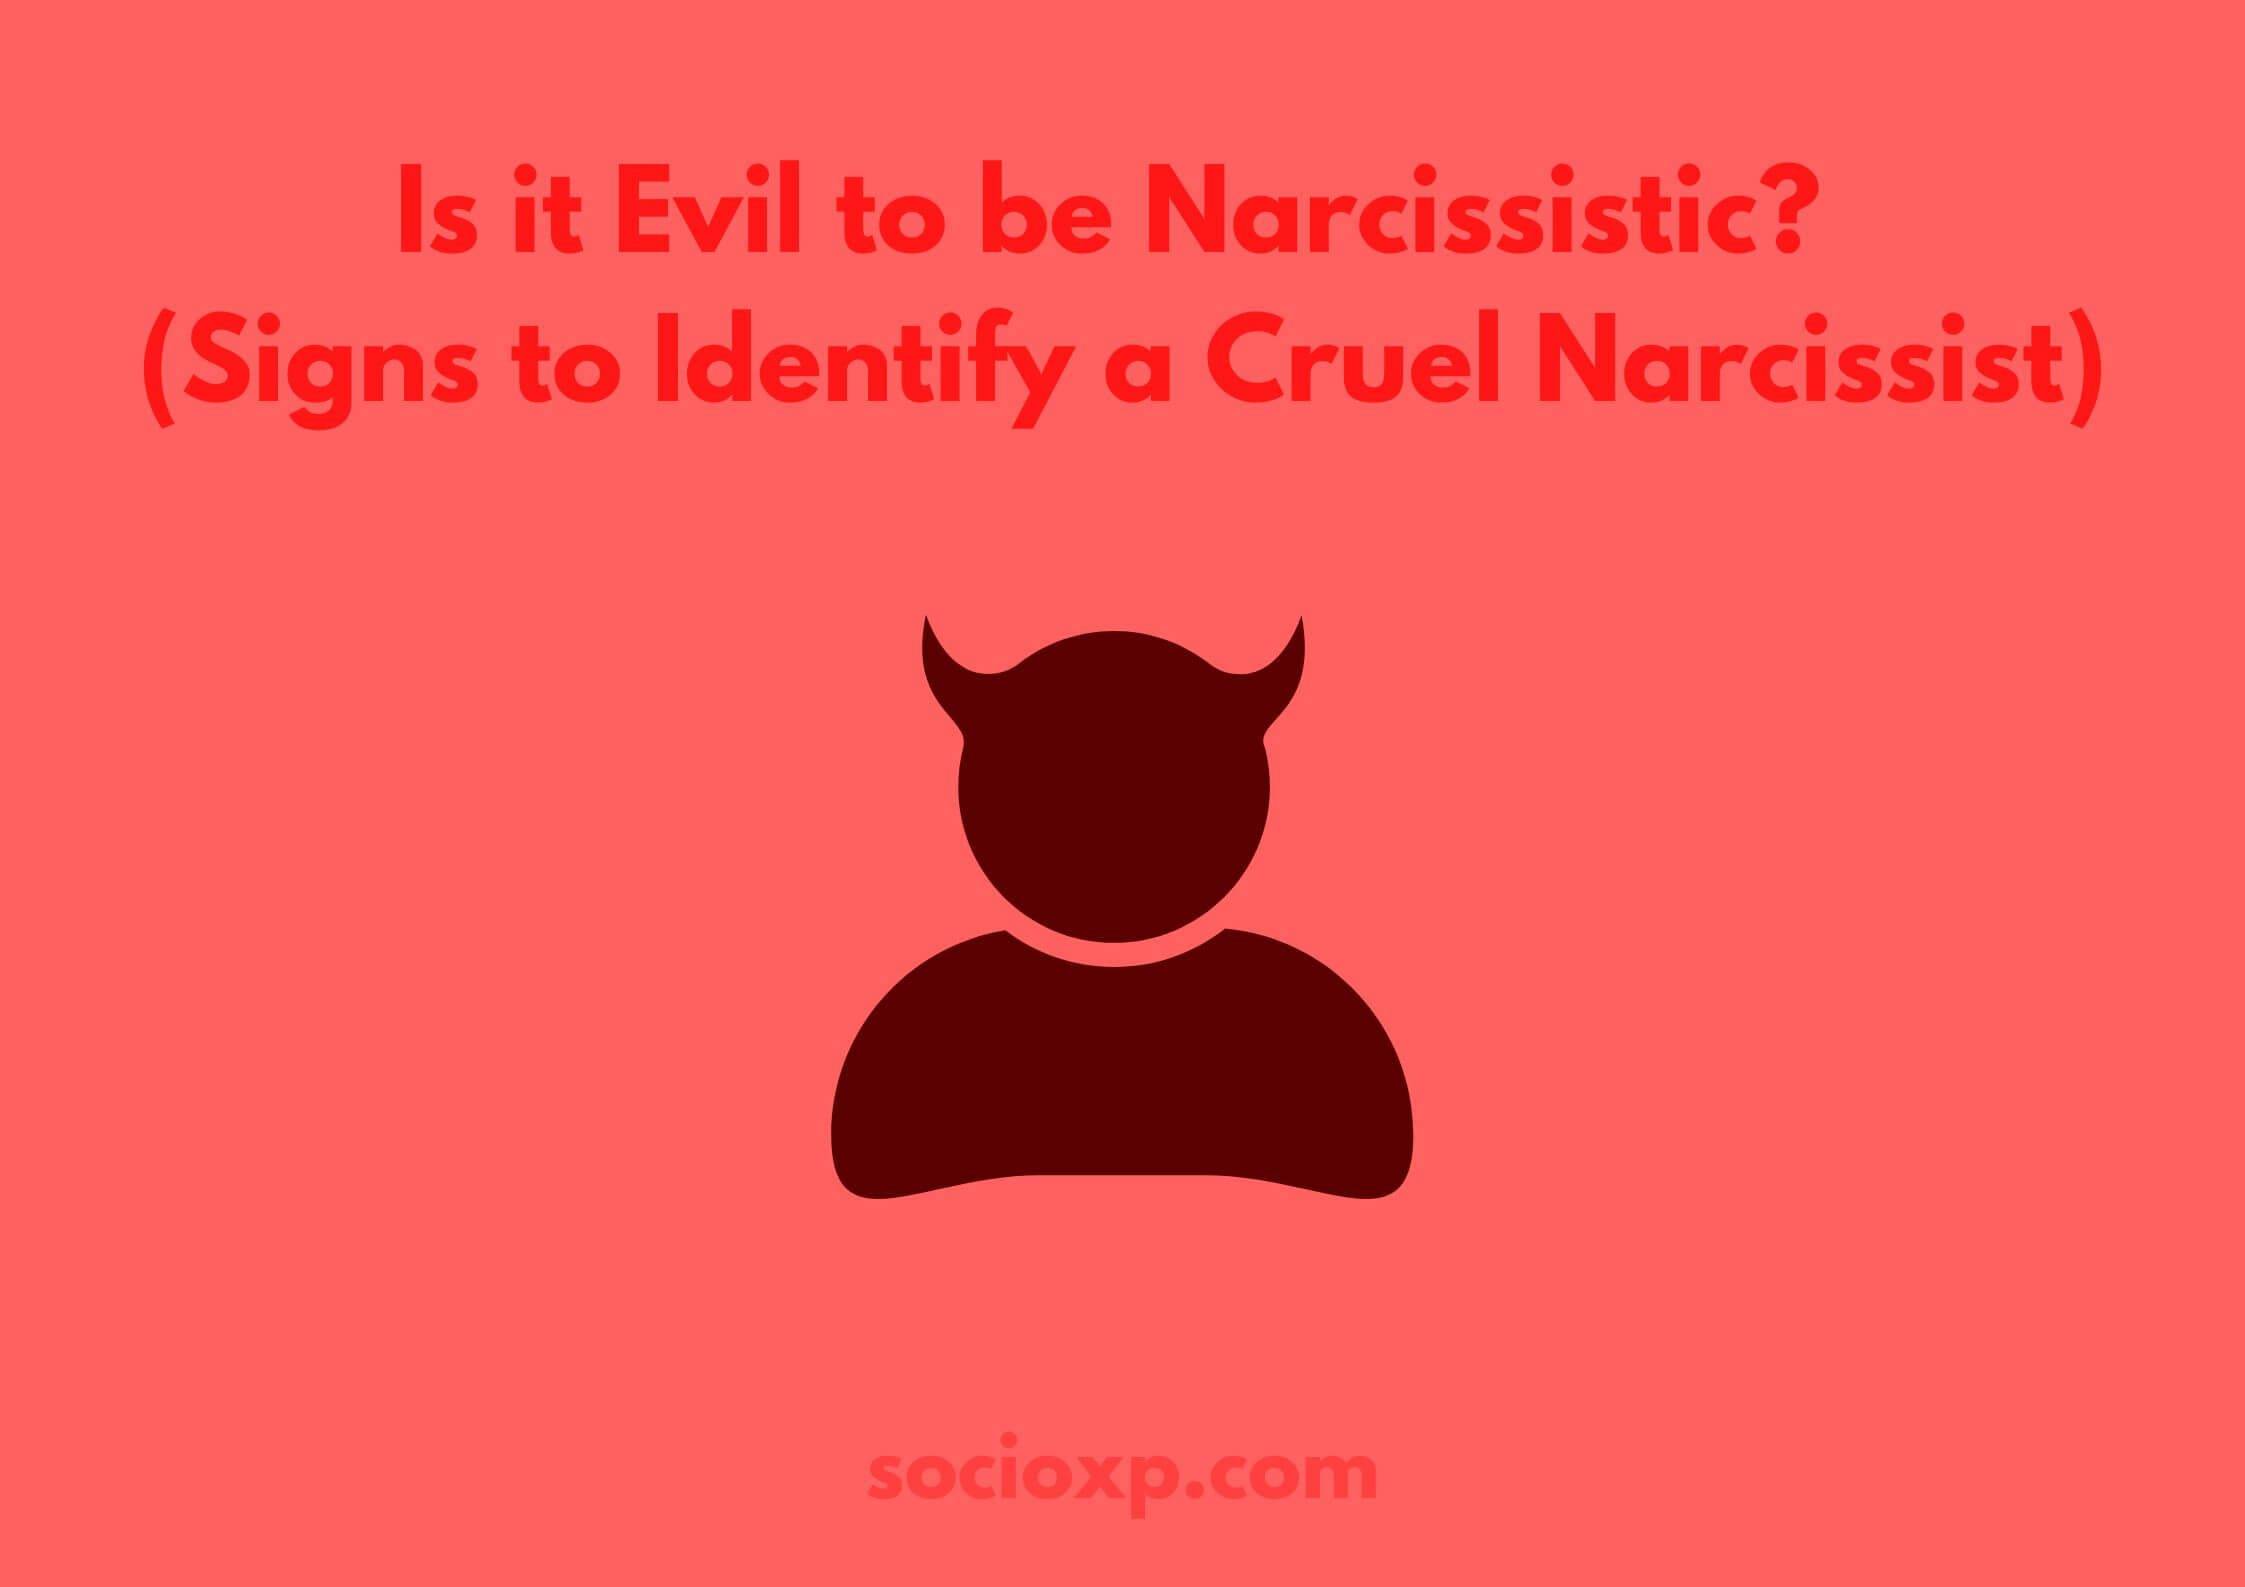 Is it Evil to be Narcissistic? (Signs to Identify a Cruel Narcissist)